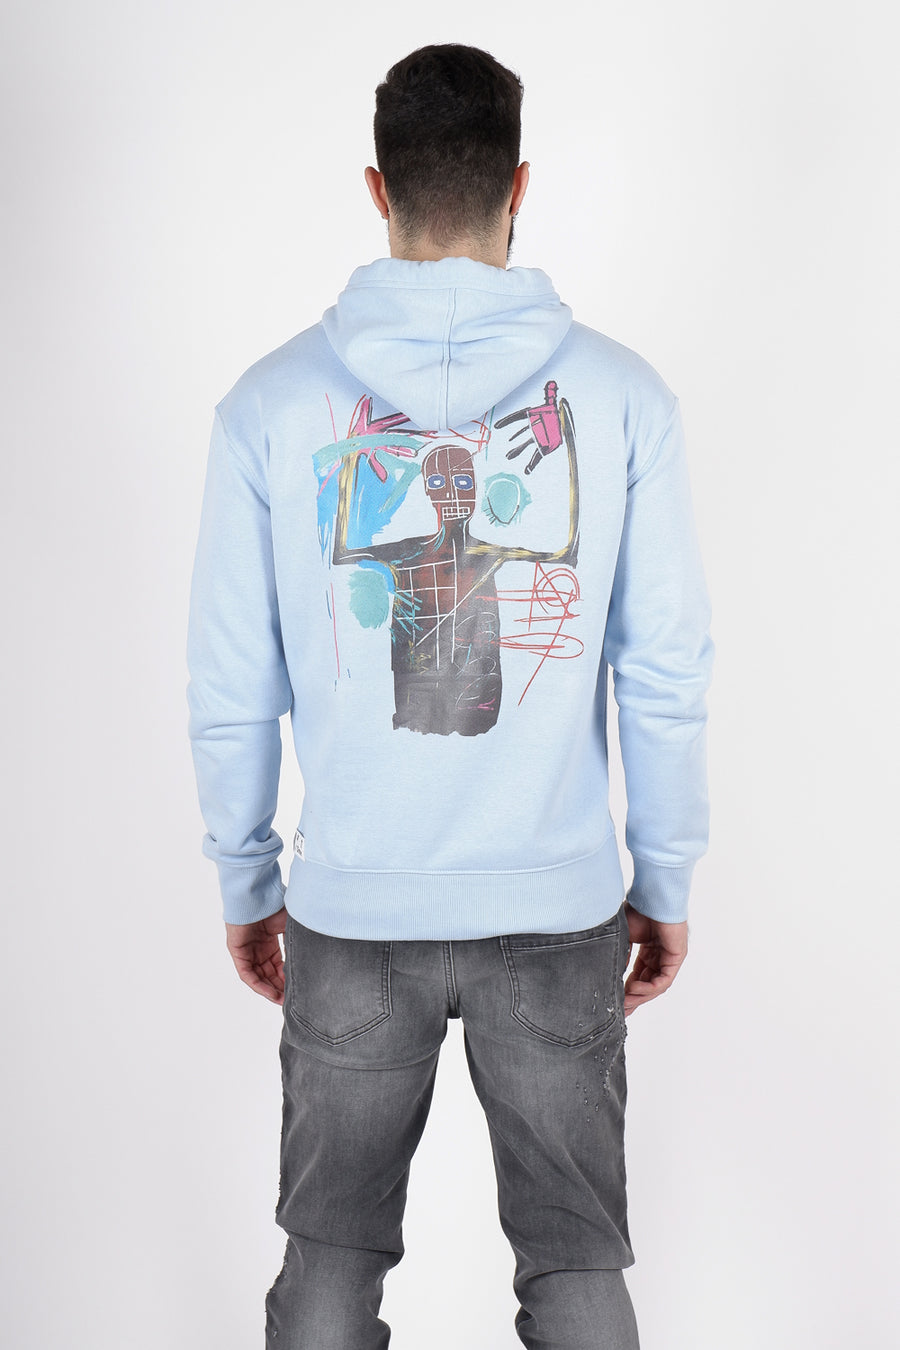 Buy the ABE Dime Hoodie in Light Blue at Intro. Spend £50 for free UK delivery. Official stockists. We ship worldwide.